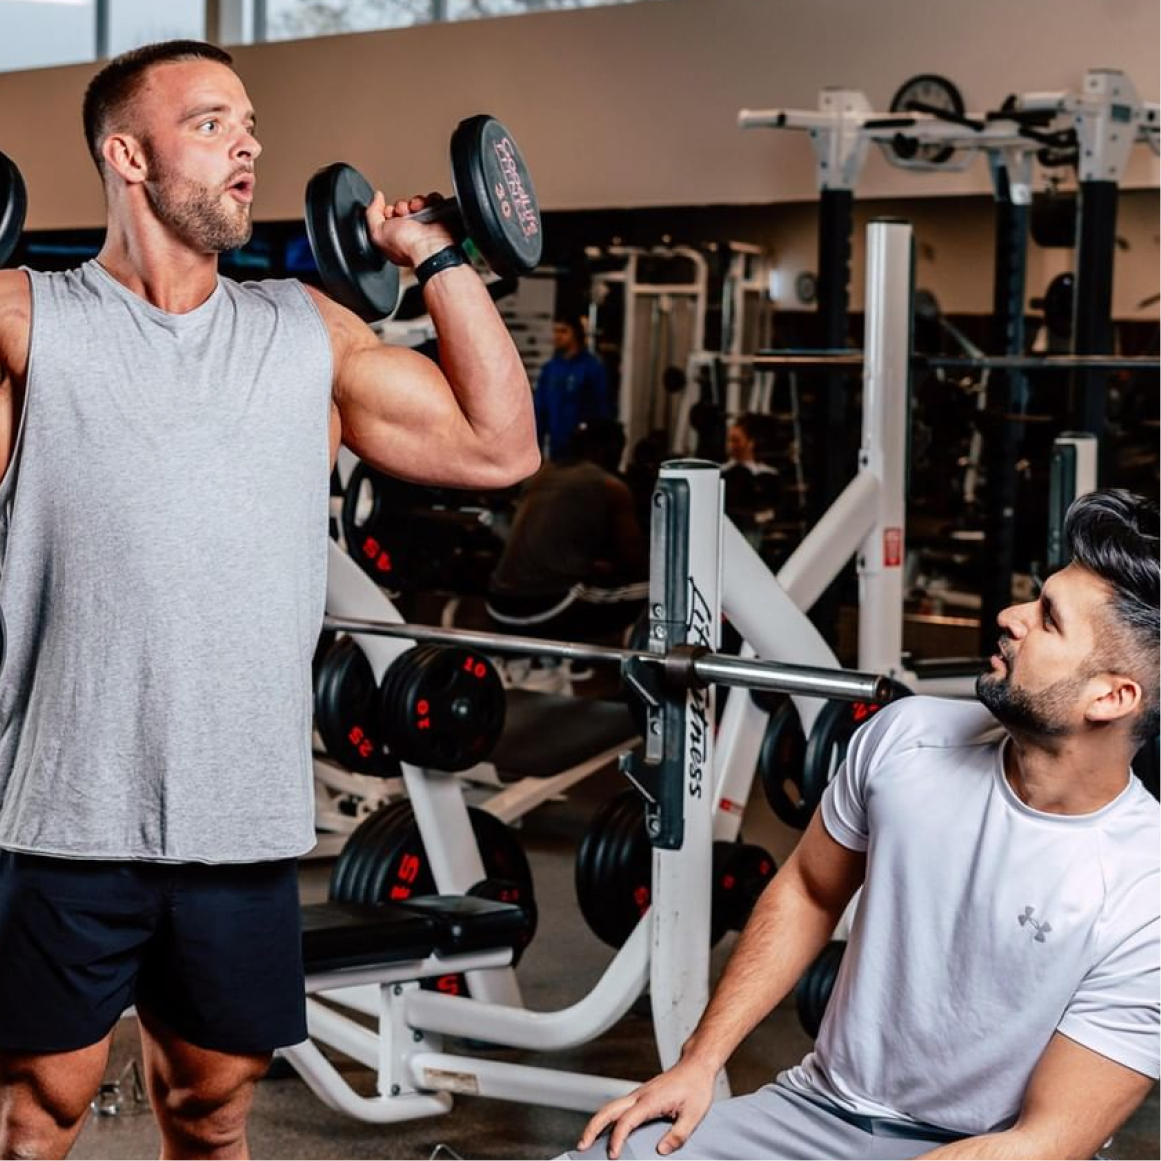 Man in grey shirt does standing shoulder presses with dumbbells while a second man on a bench in a white t-shirt observes his form